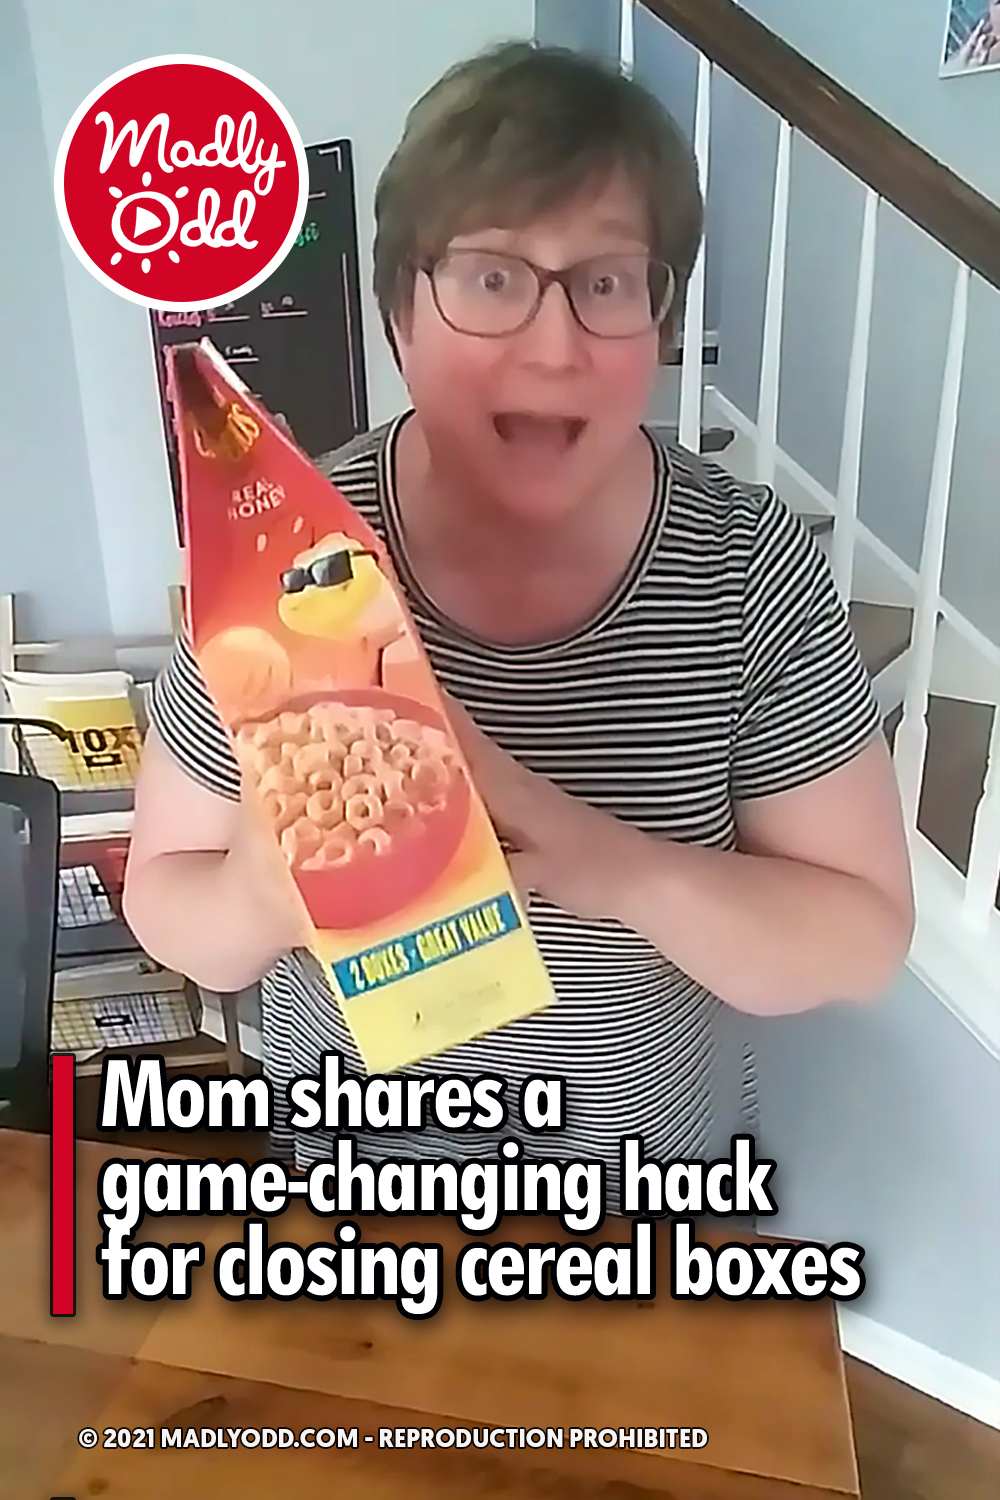 Mom shares a game-changing hack for closing cereal boxes